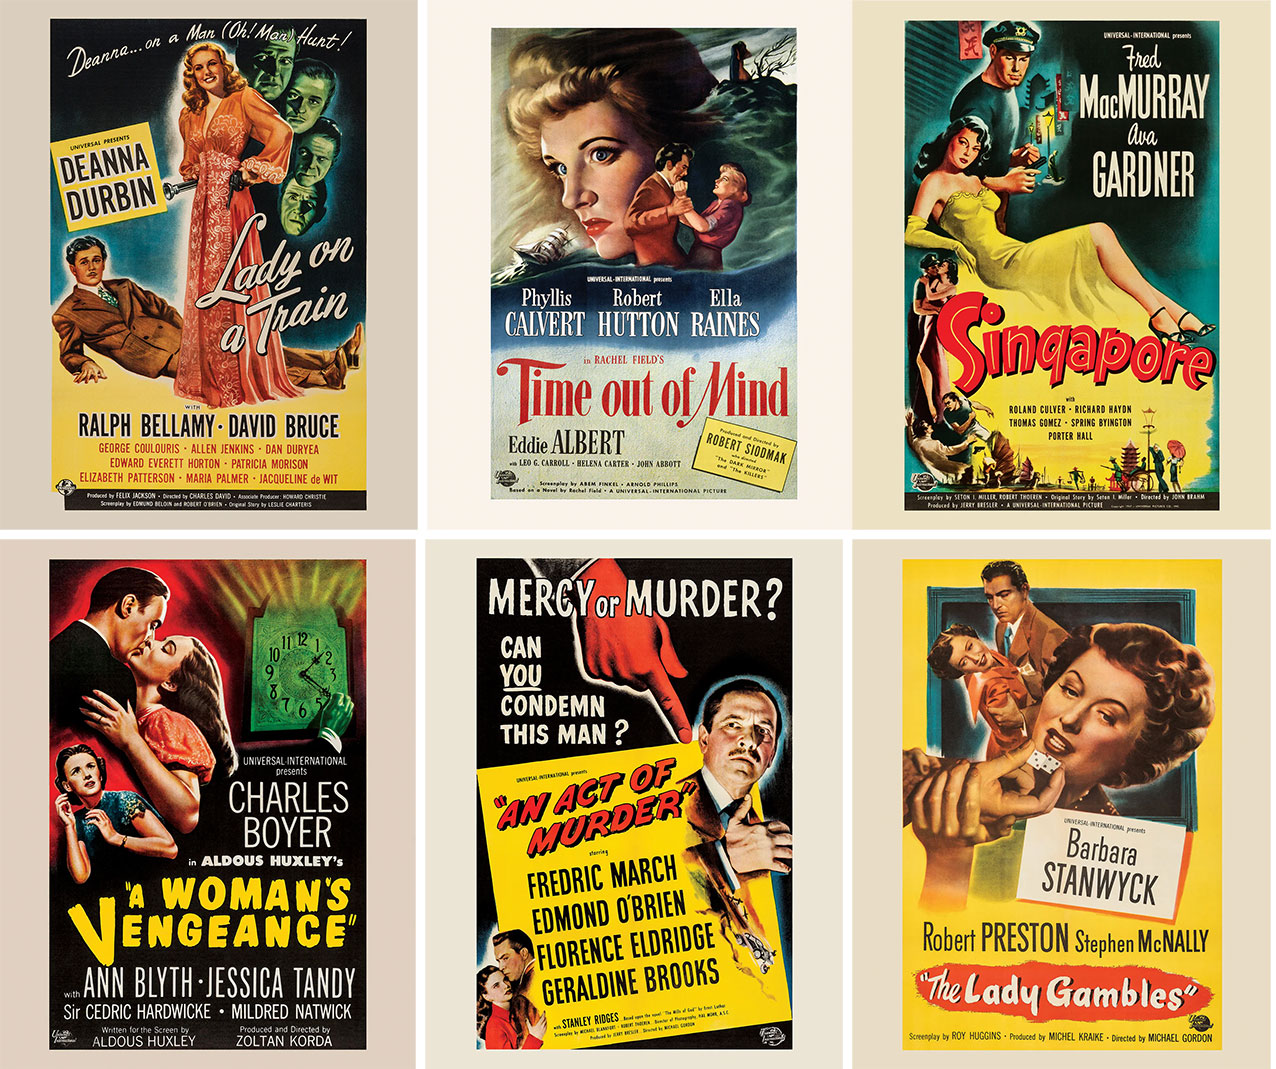 Posters for Lady on a Train, Time Out of Mind, Singapore, A Woman's Vengeance, An Act of Murder and The Lady Gambles